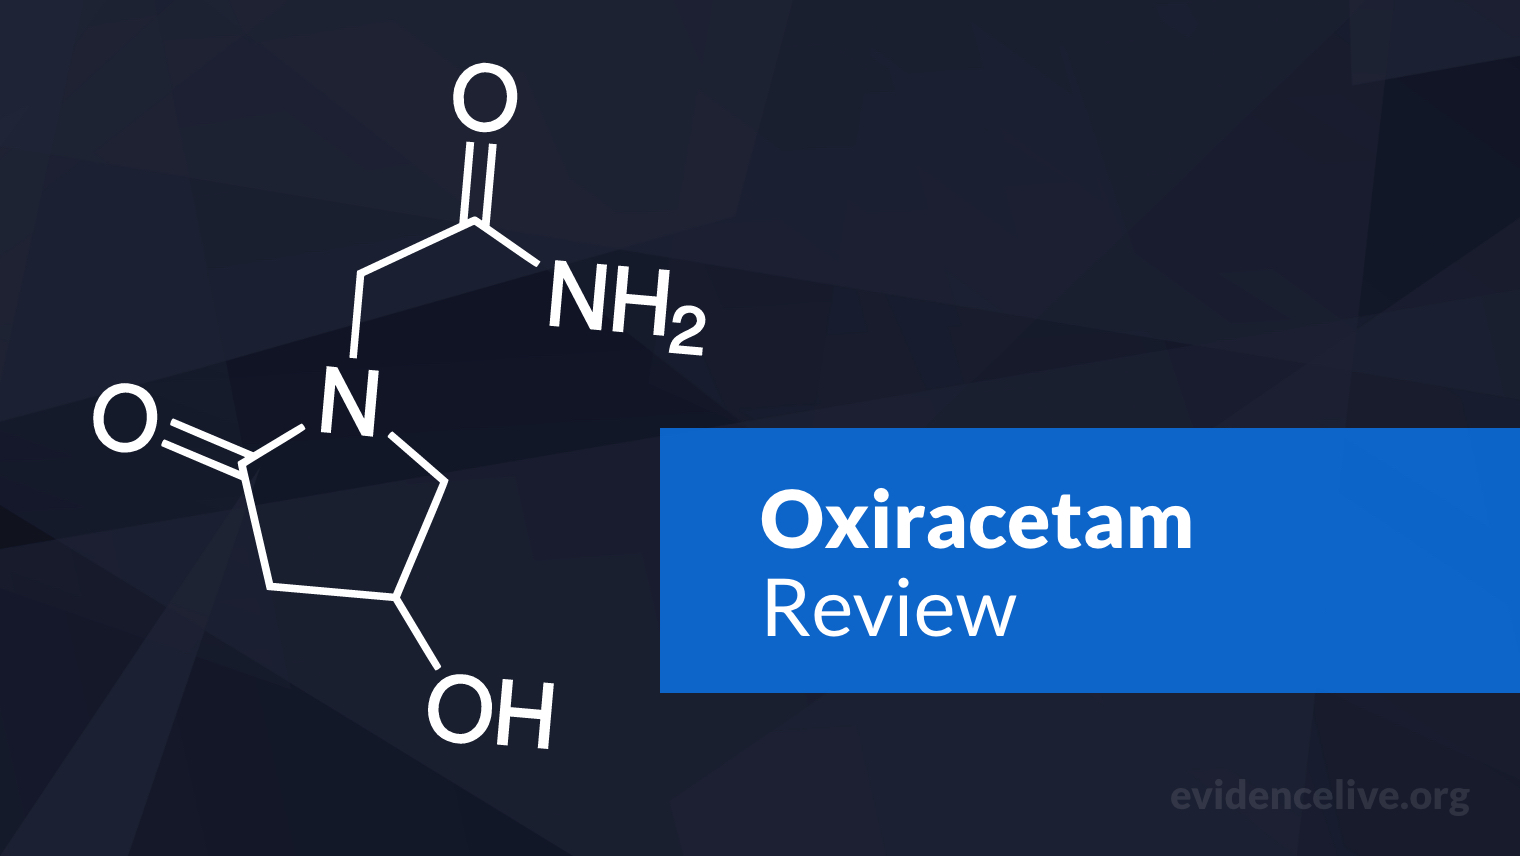 Oxiracetam: Benefits, Uses, Dosage, and Side Effects